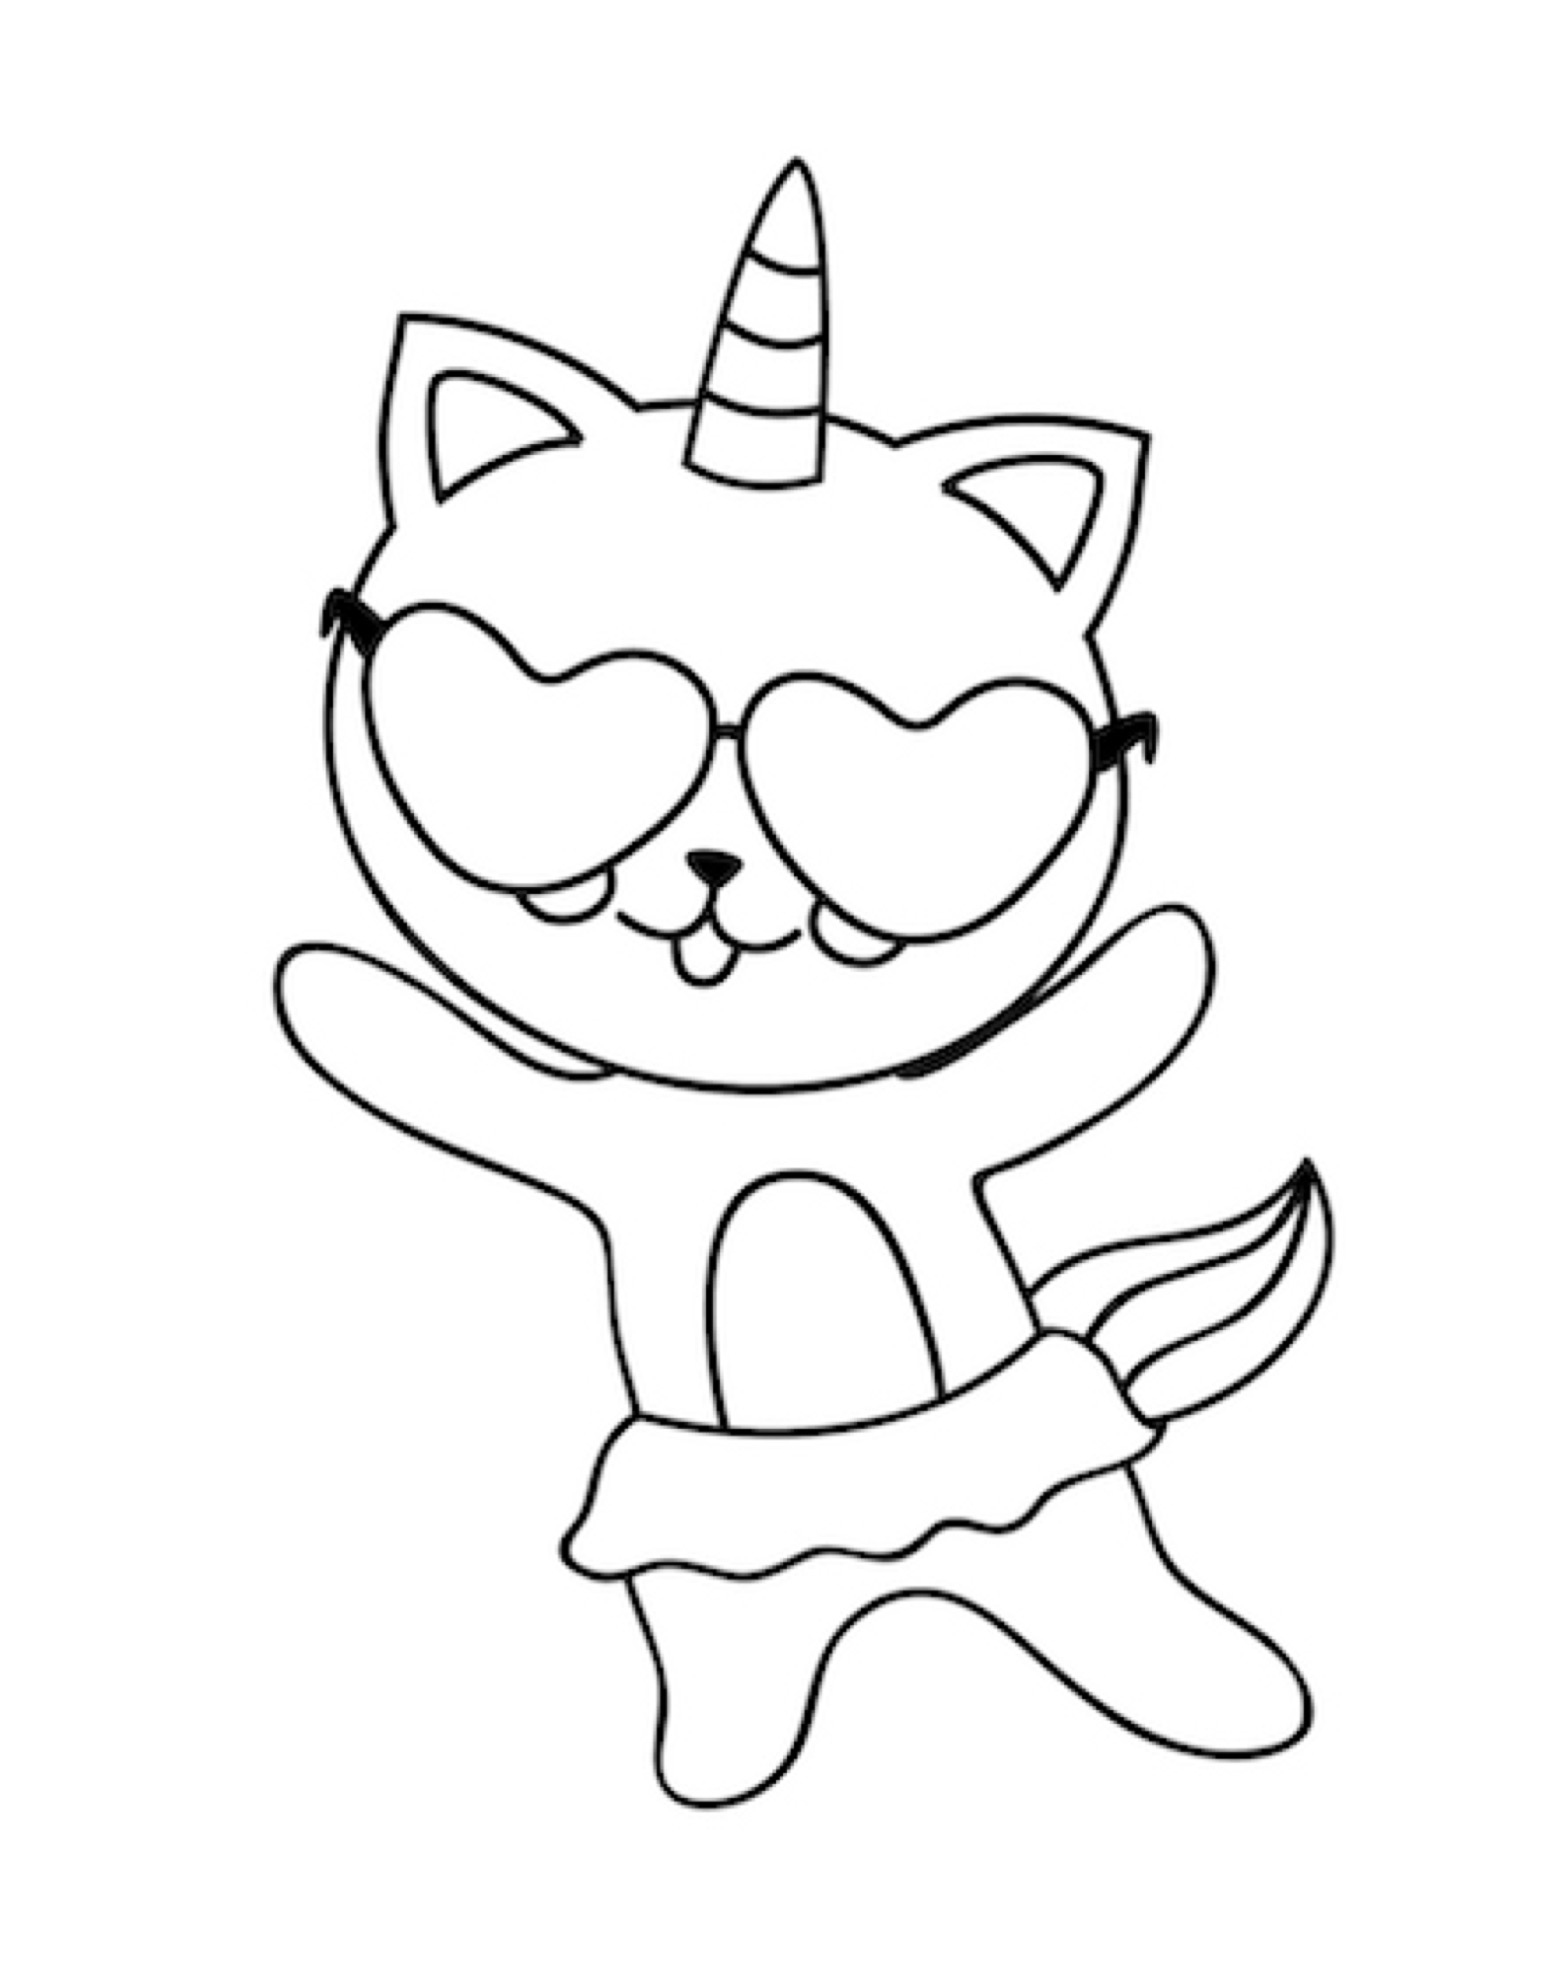 Dancing Unicorn Cat Coloring Page